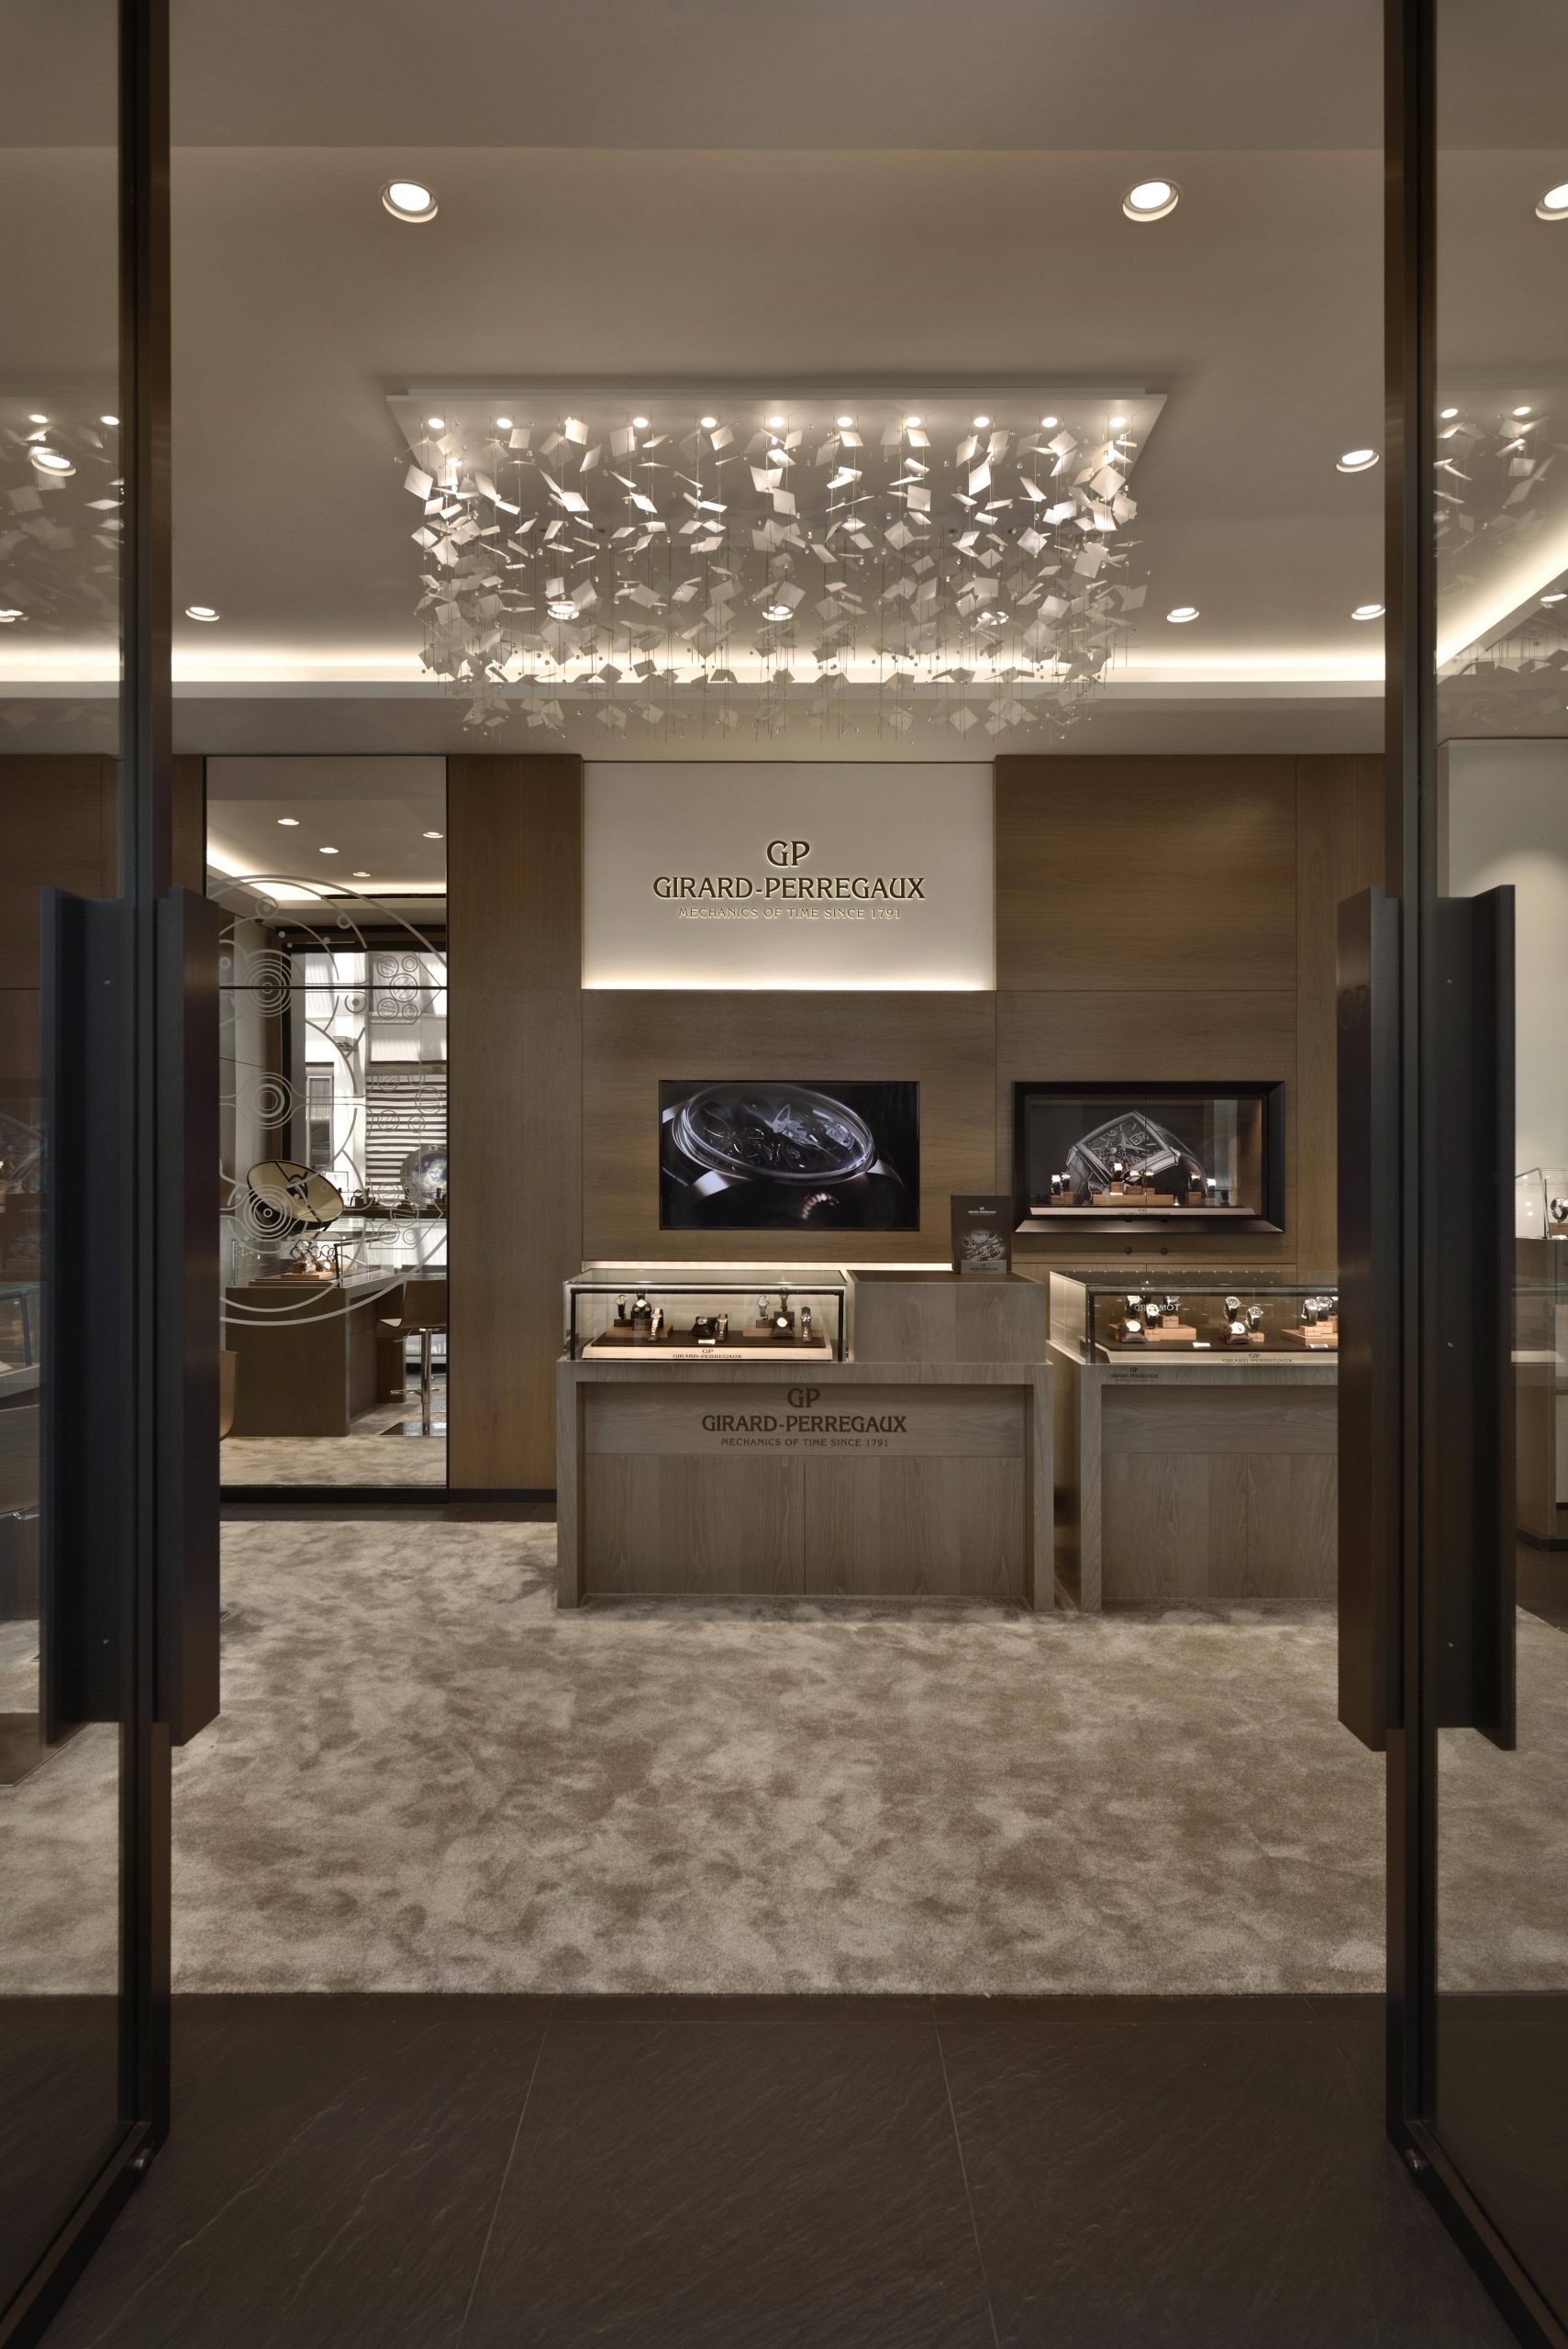 Girard-Perregaux Hour Glass Singapore Aerial lights chandelier piece adds height and dramatic touch to the boutique